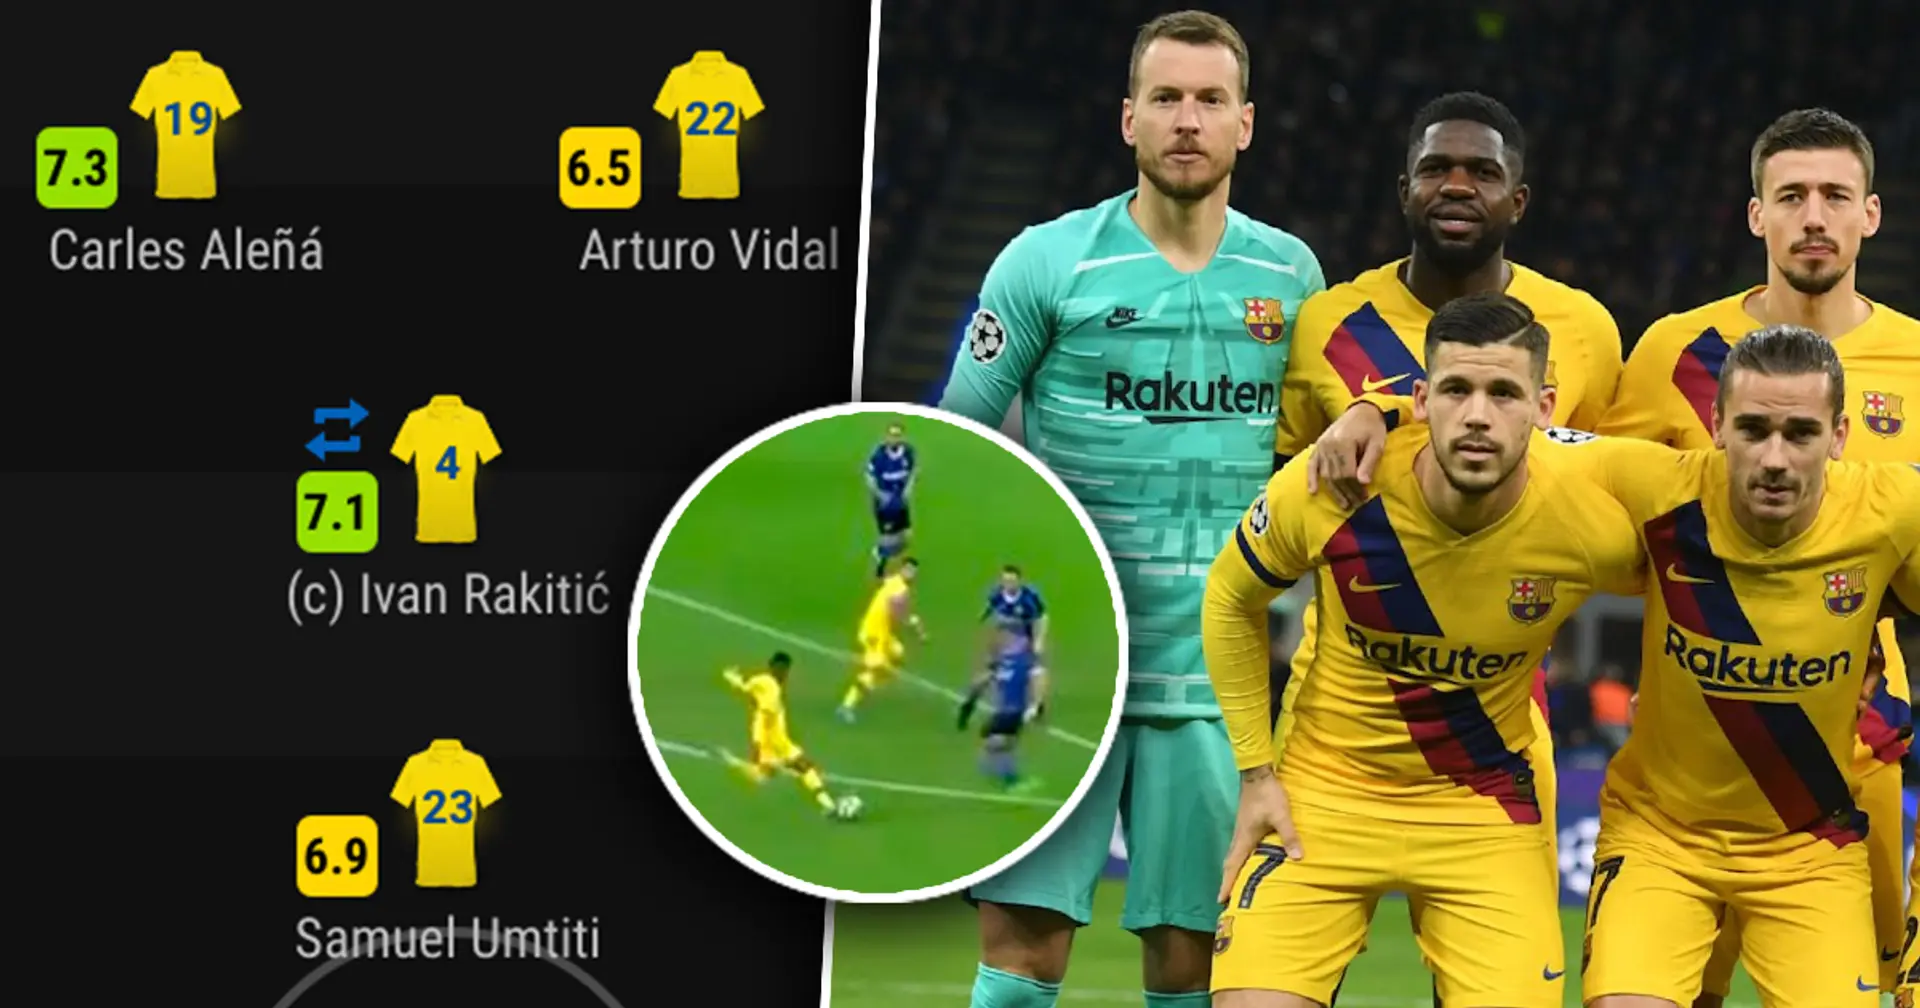 No Messi, Todibo's defensive masterclass: Barca XI the last time they beat Inter Milan